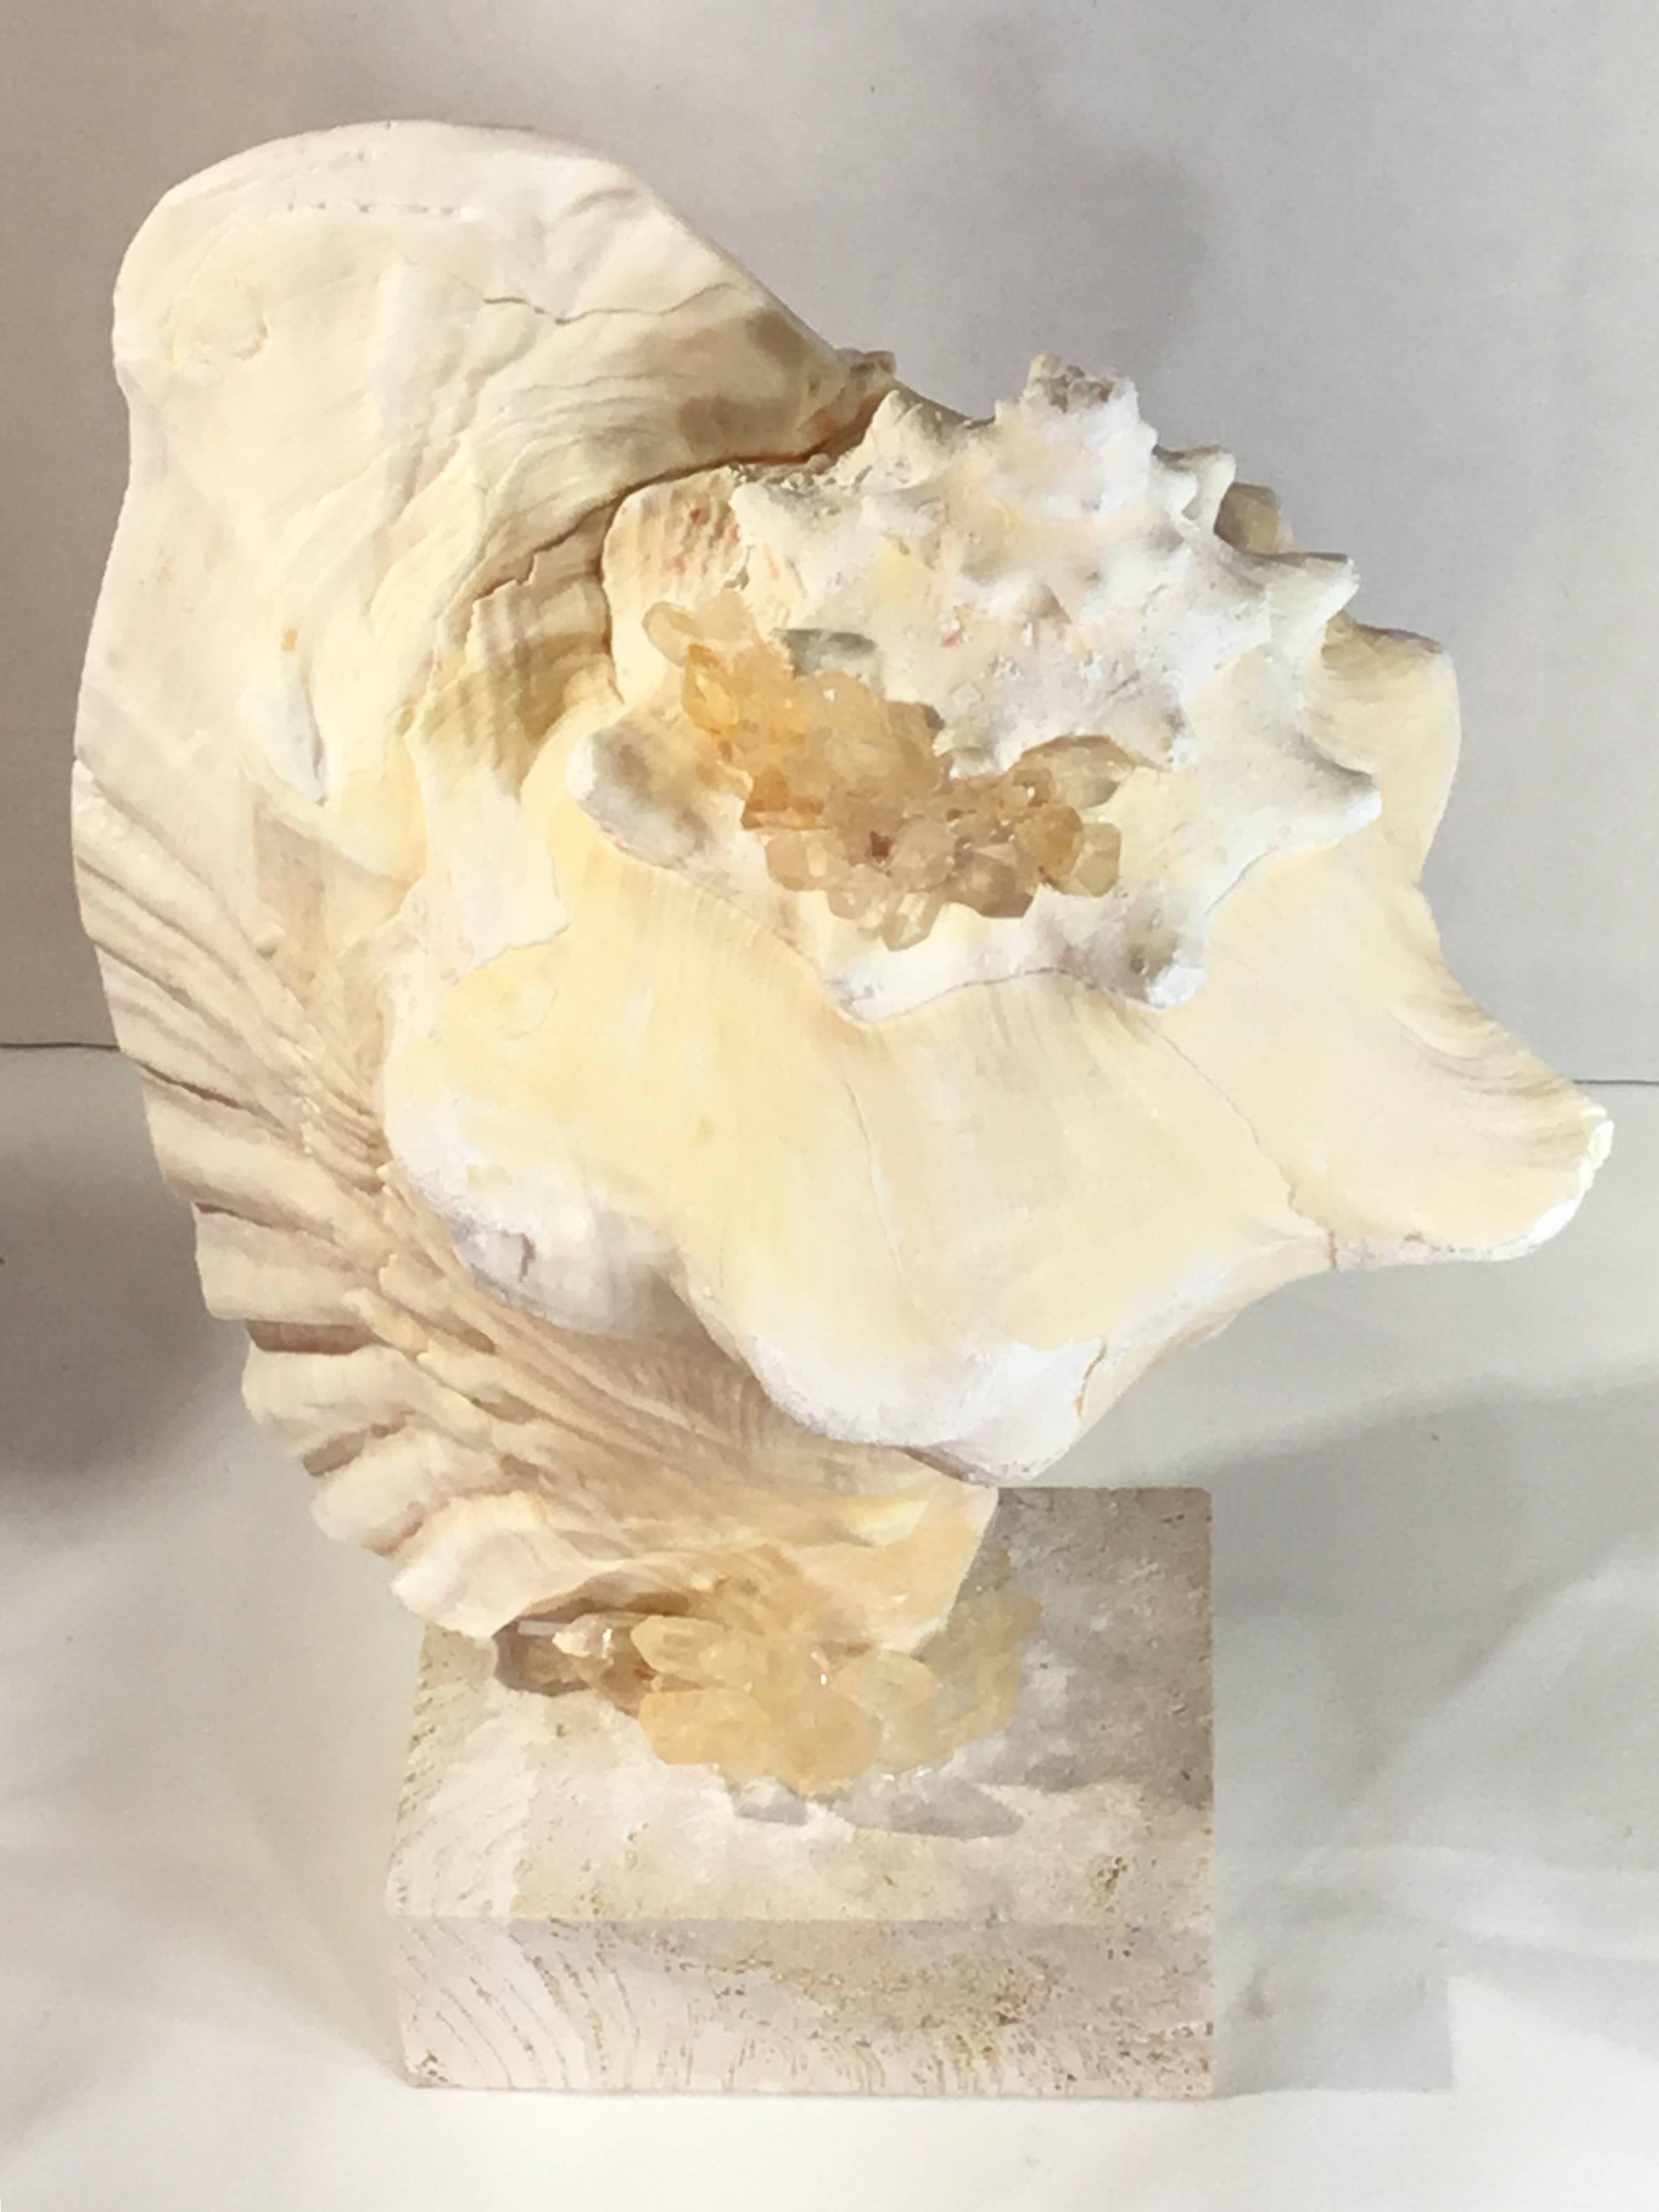 Beautiful conch shell professionally mounted on a coral base, with crystal quartz pieces artistically embedded in decorative object of art for display.